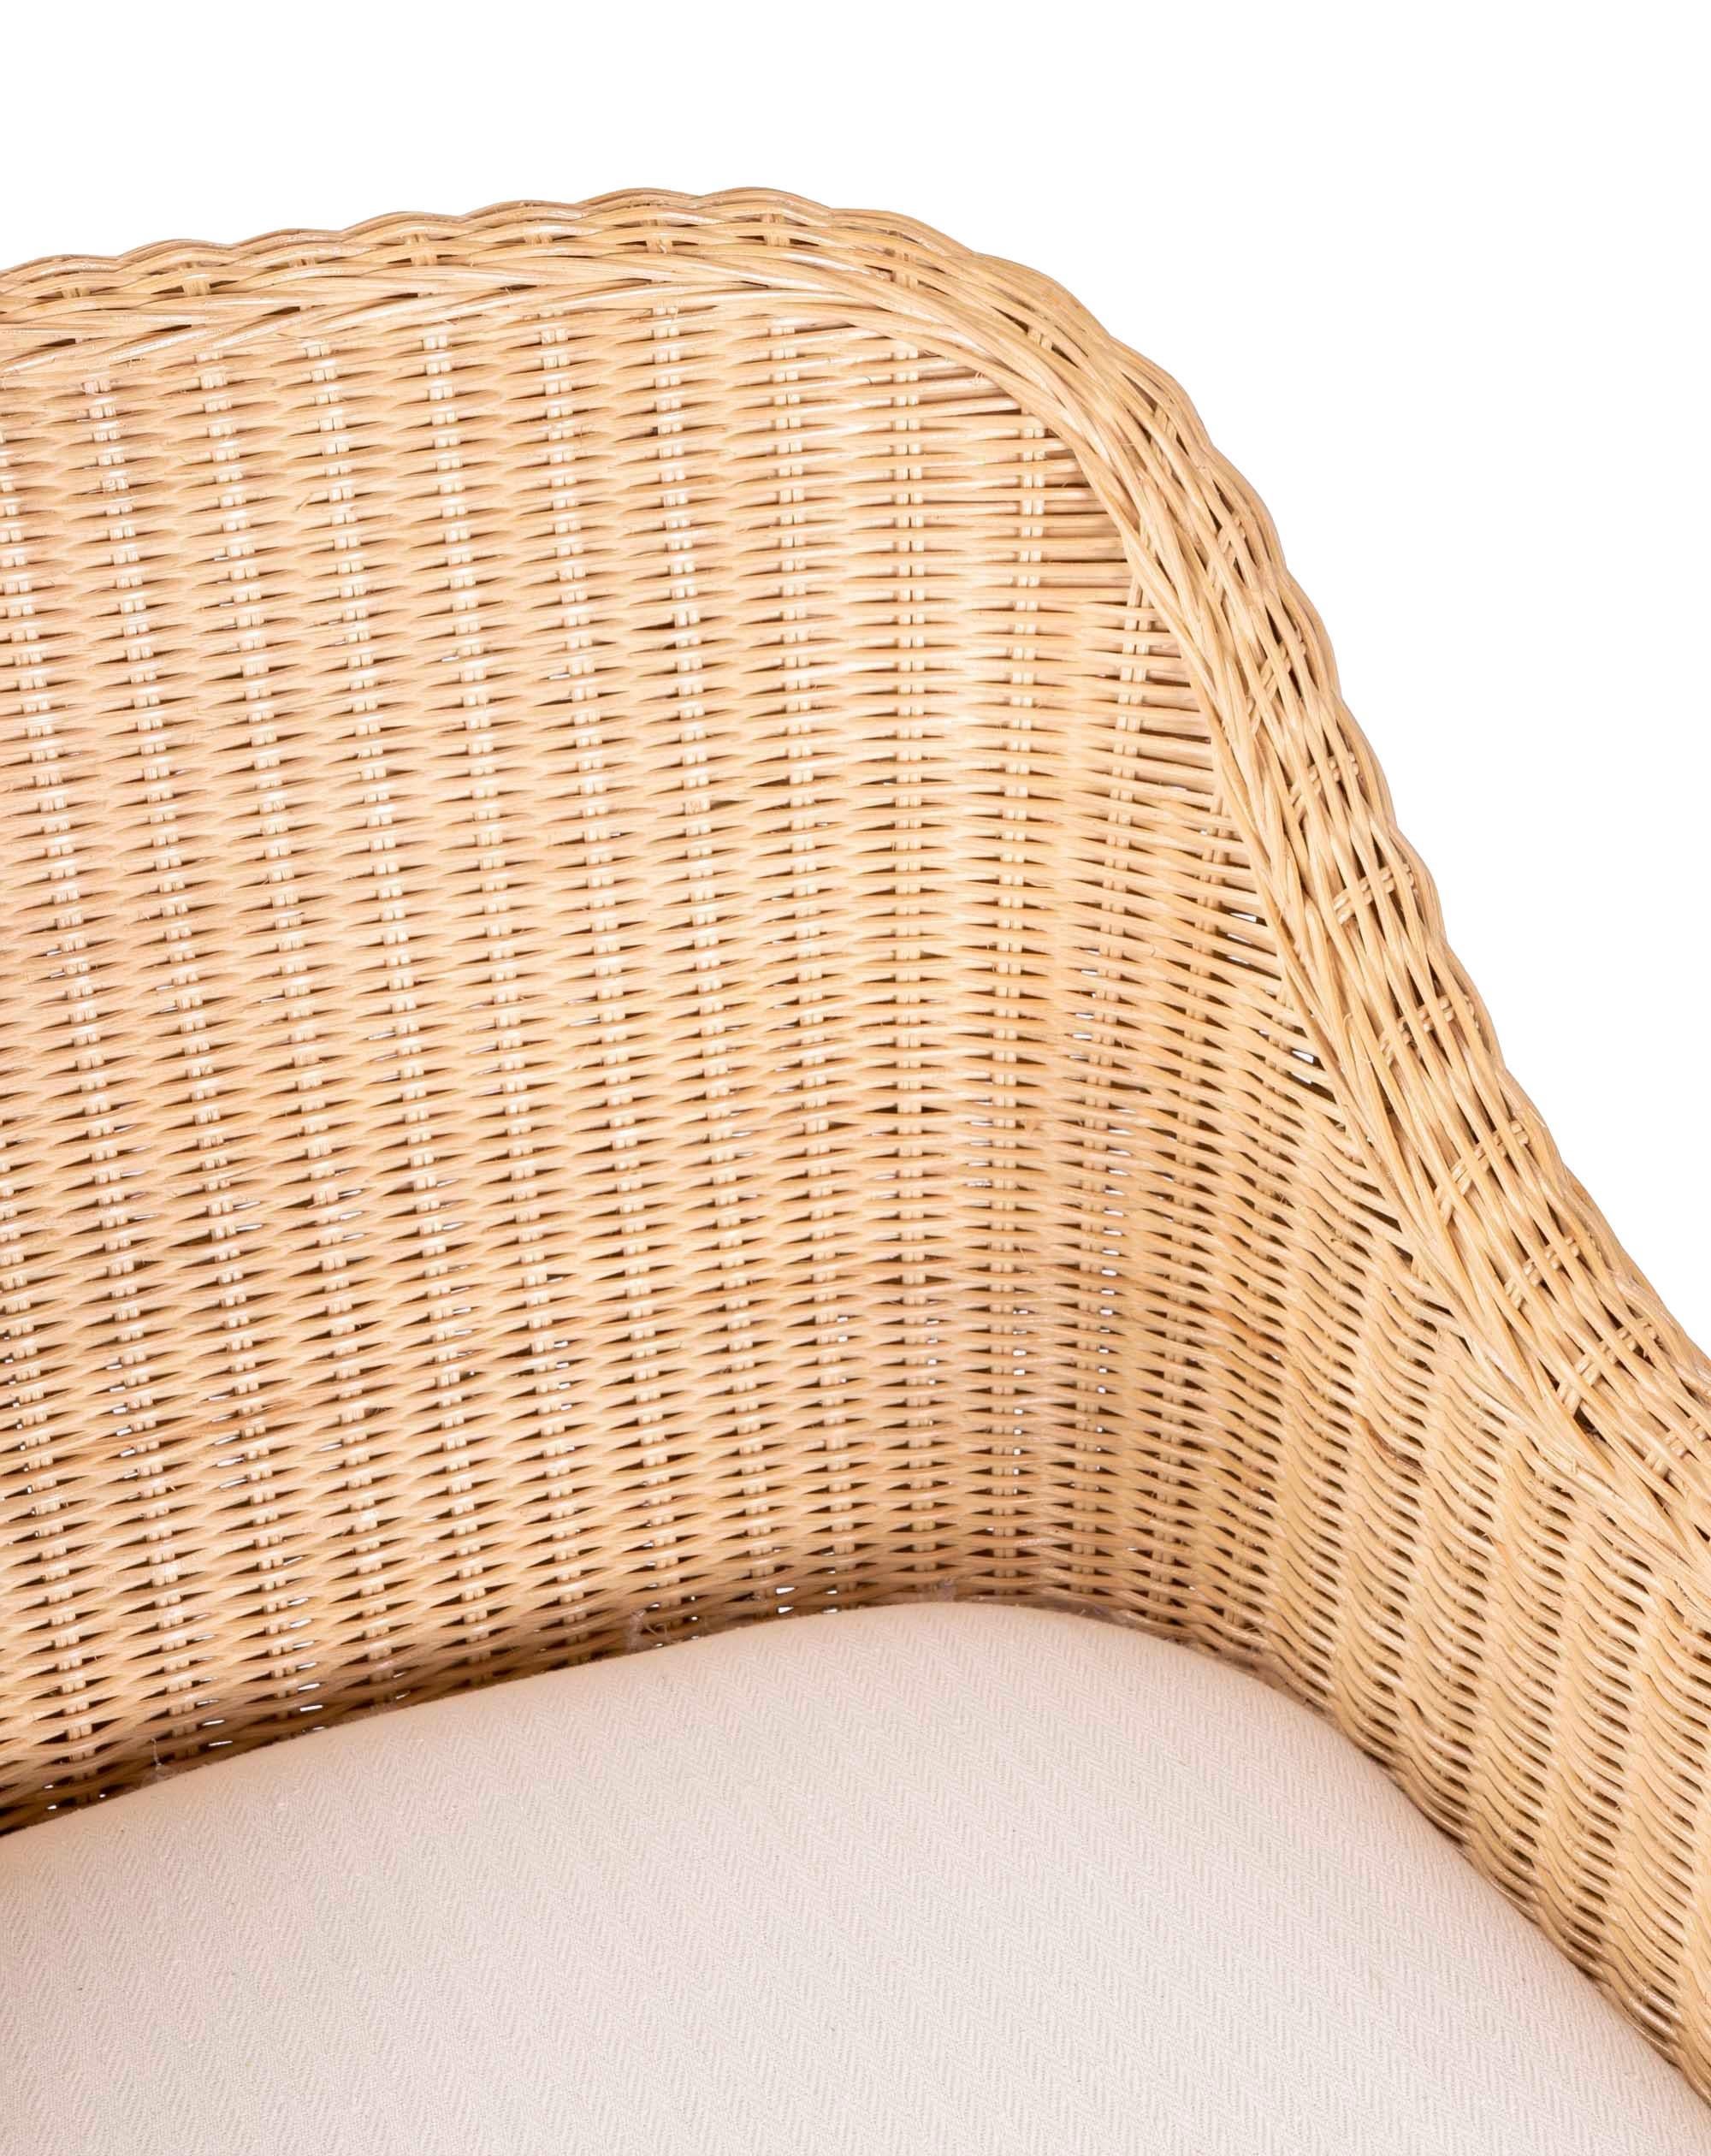 Upholstered Rattan and Wicker Bar stool with Sideways Movement 6